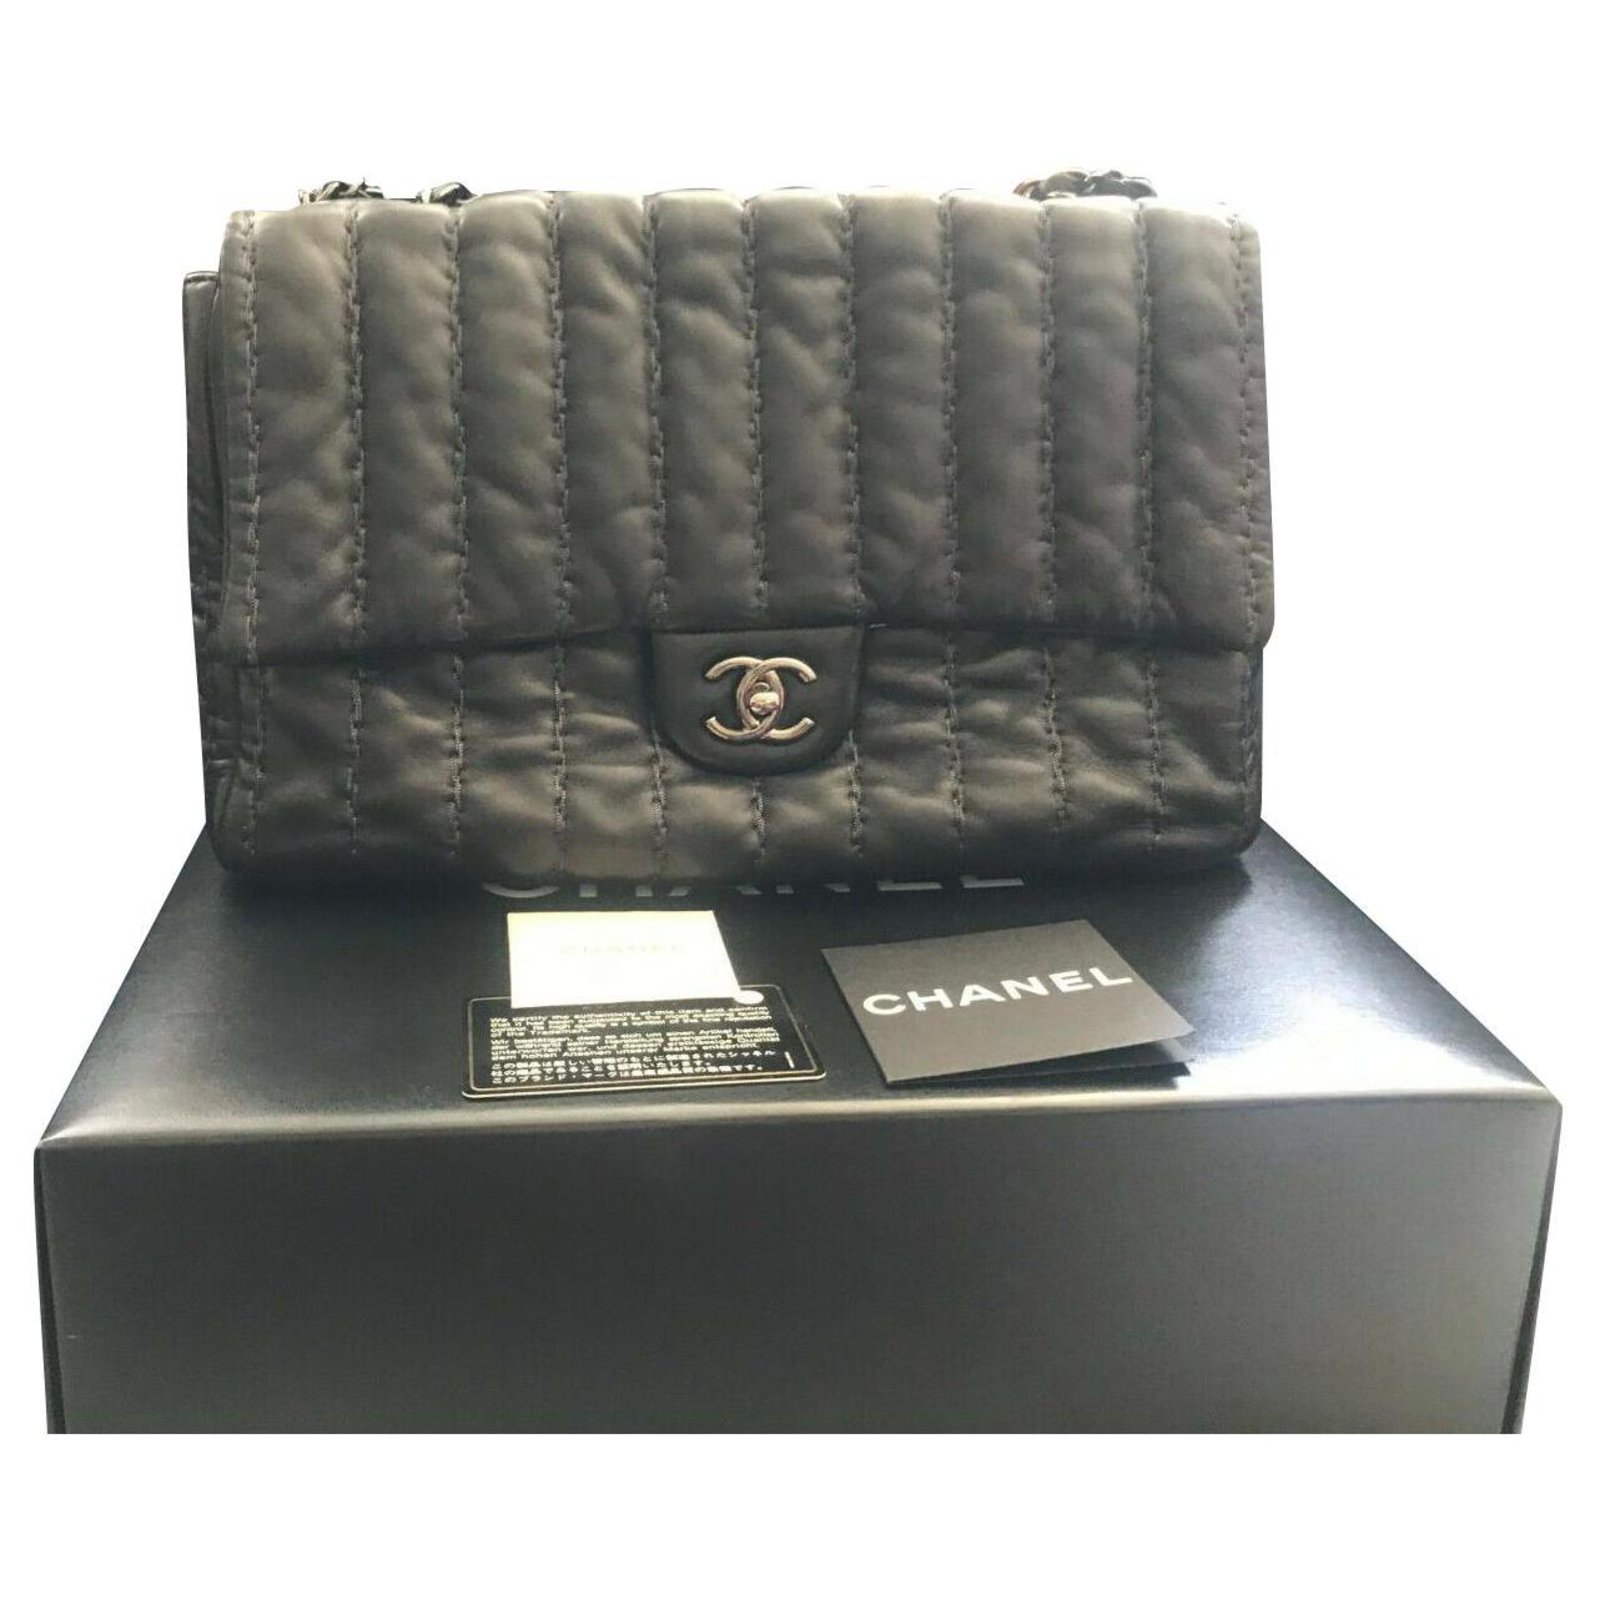 100% Authentic Chanel Lambskin black Shimmery Striped Quilted